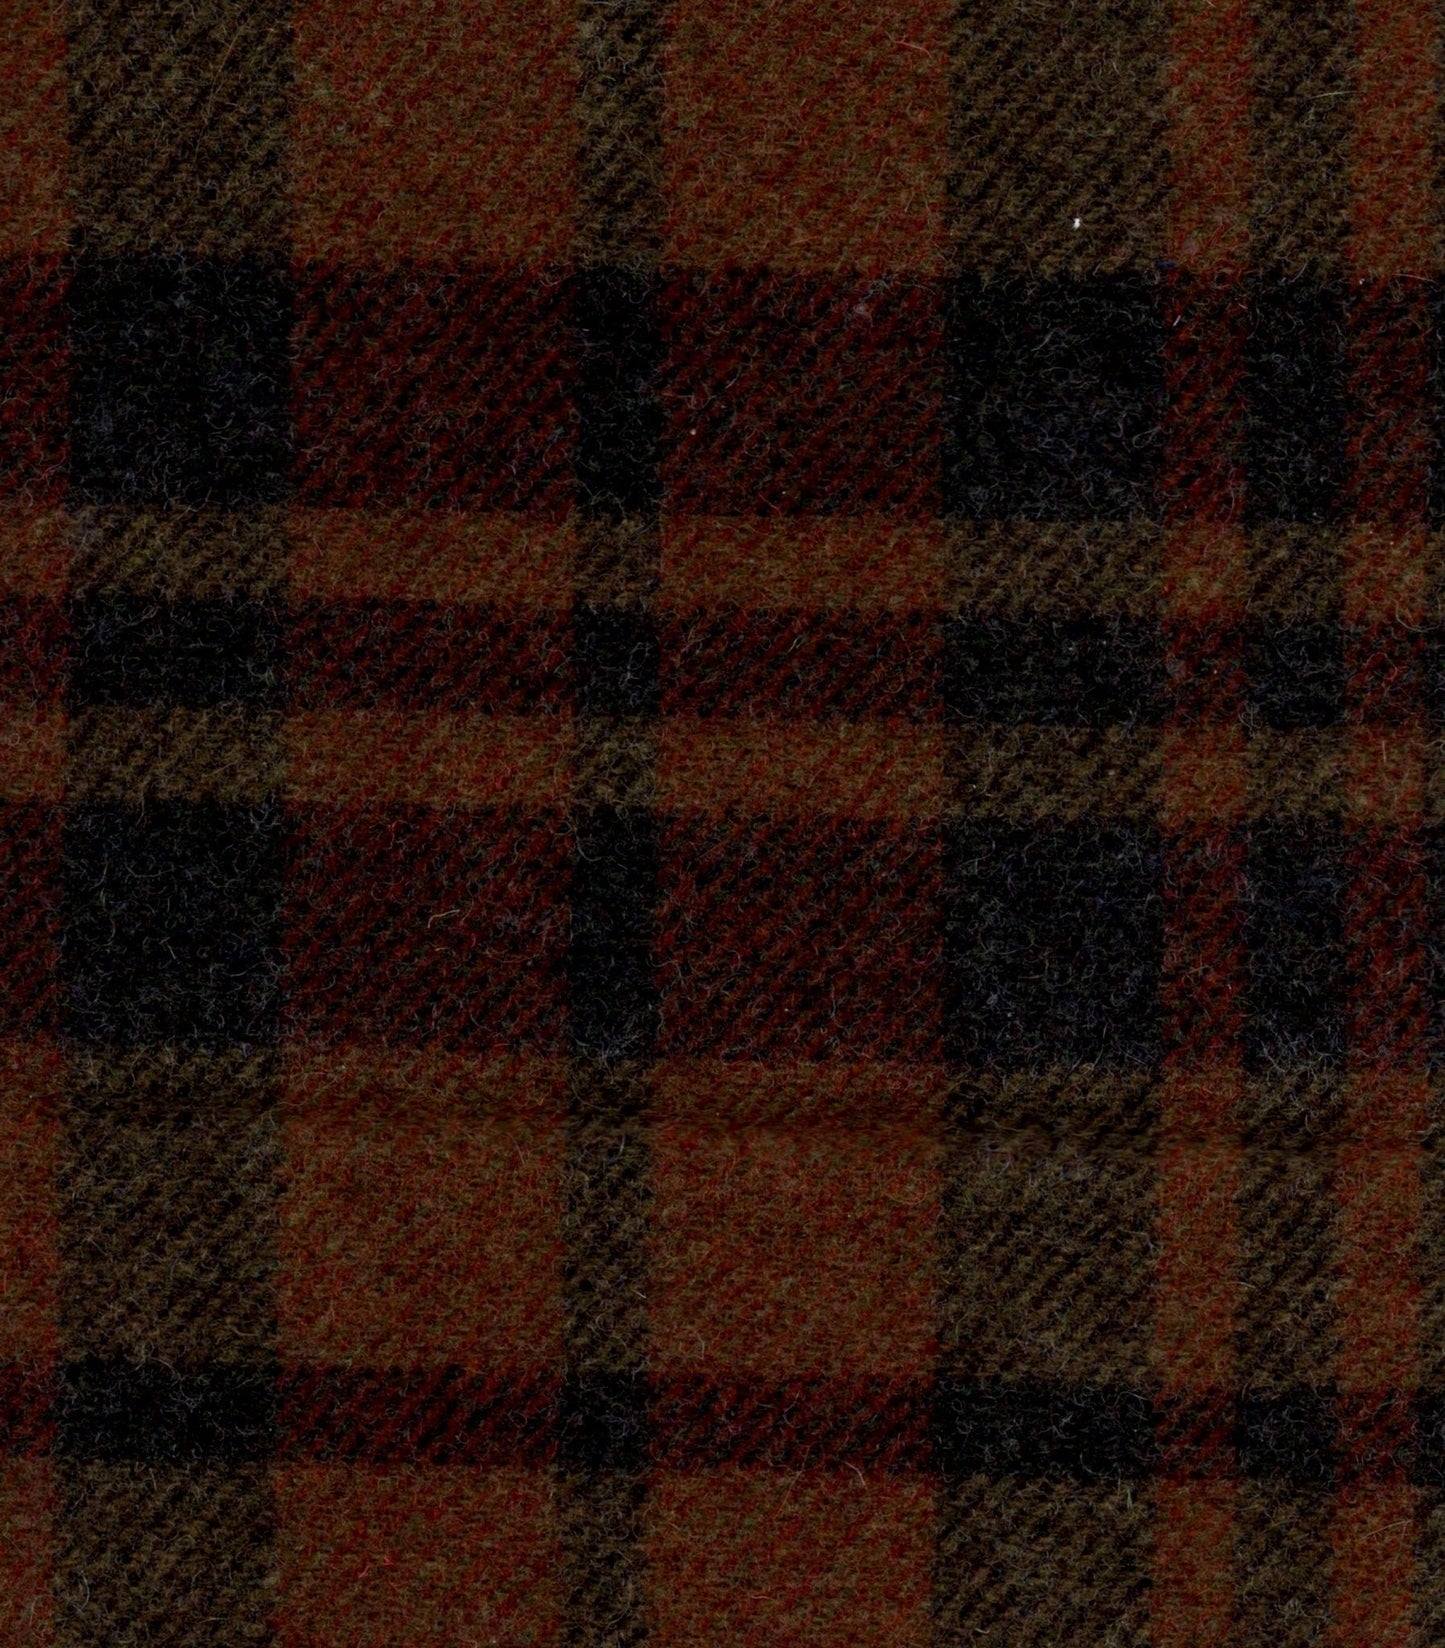 Wool fabric swatch brown and black plaid